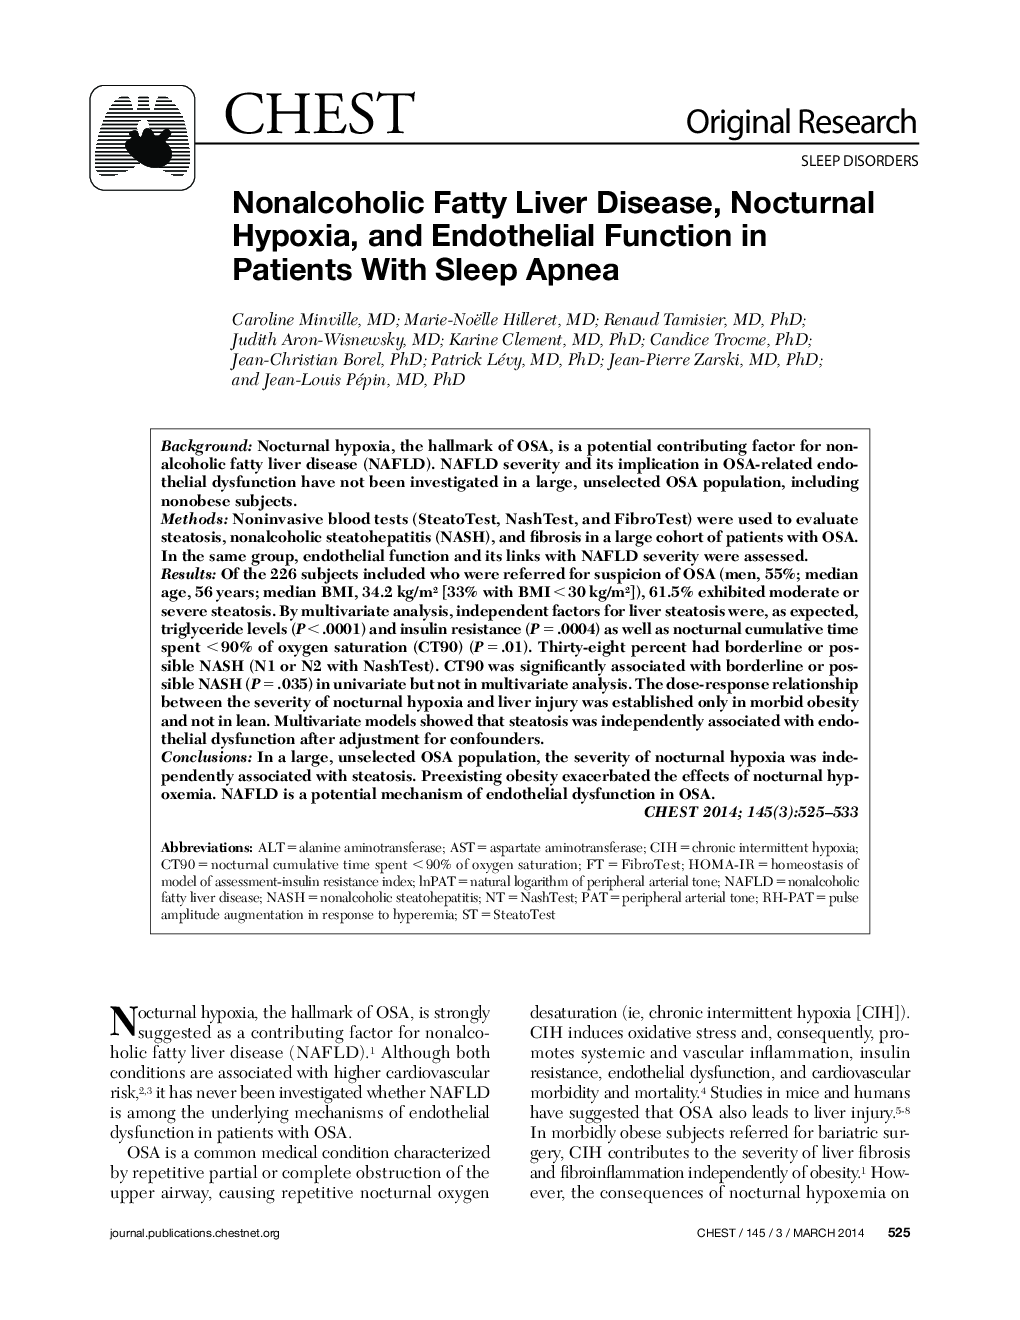 Nonalcoholic Fatty Liver Disease, Nocturnal Hypoxia, and Endothelial Function in Patients With Sleep Apnea 